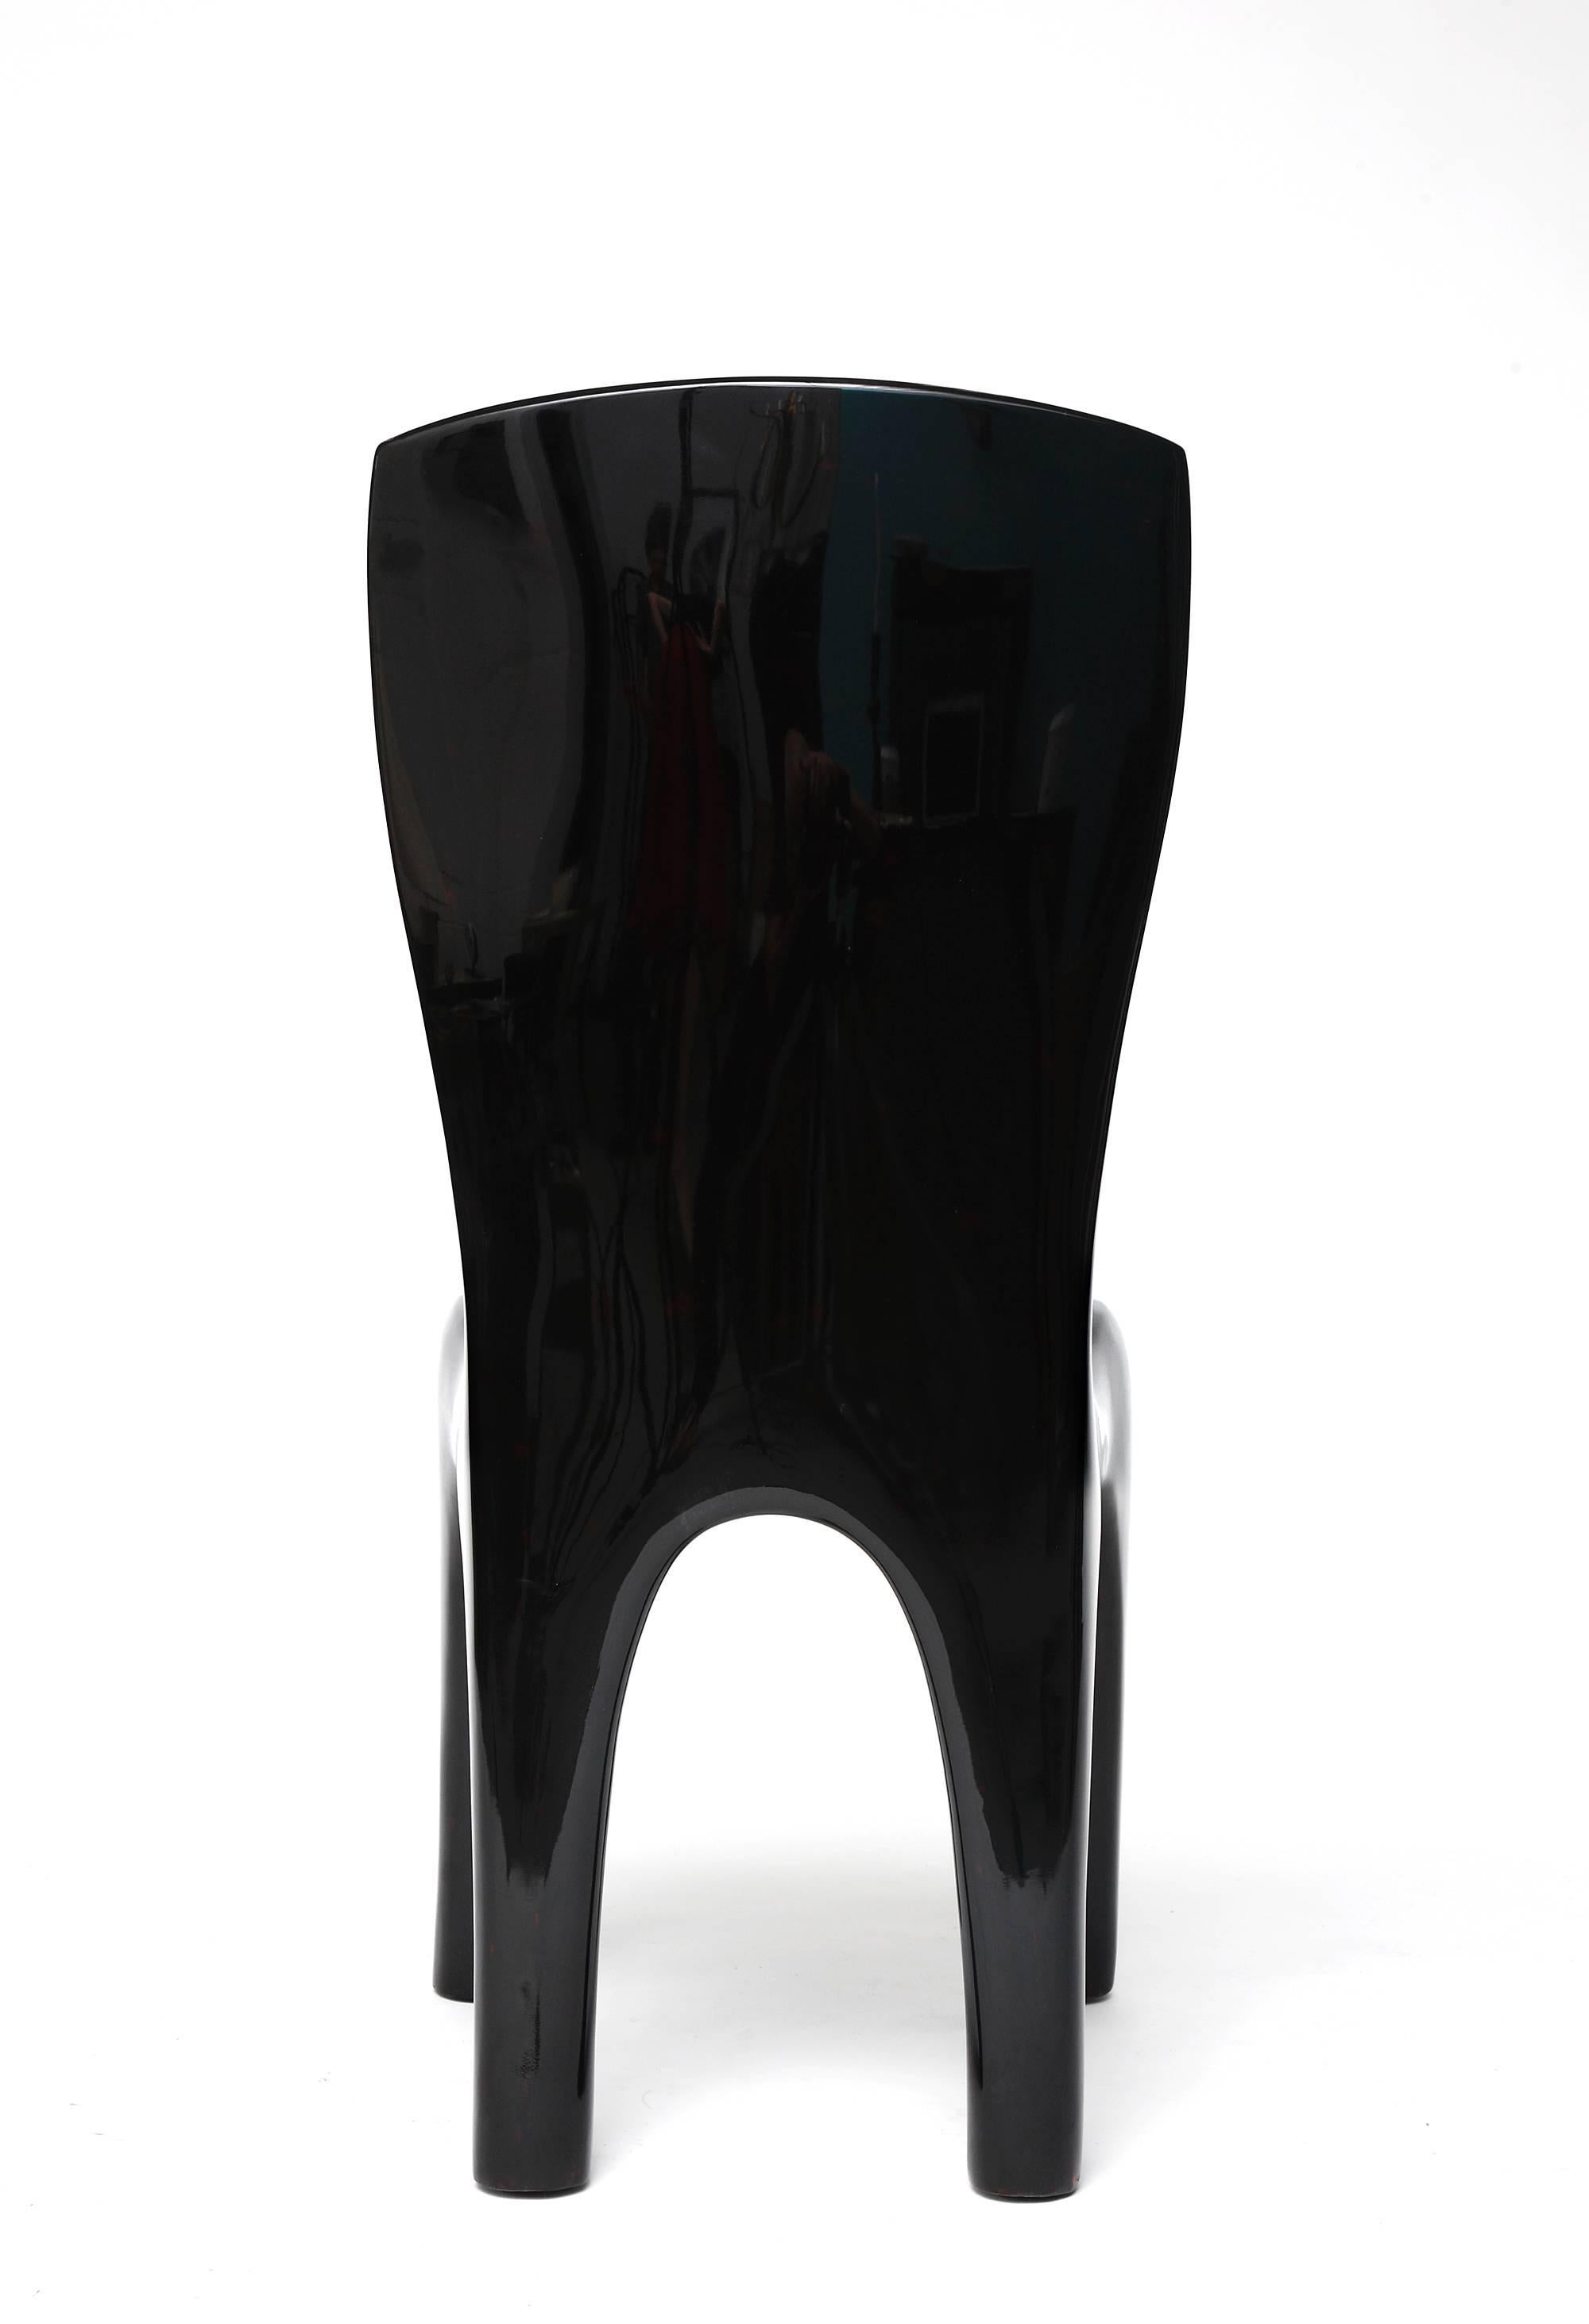 Scrap Wood Sculpted Dining Chairs in Black Lacquer by Jacques Jarrige, 2015